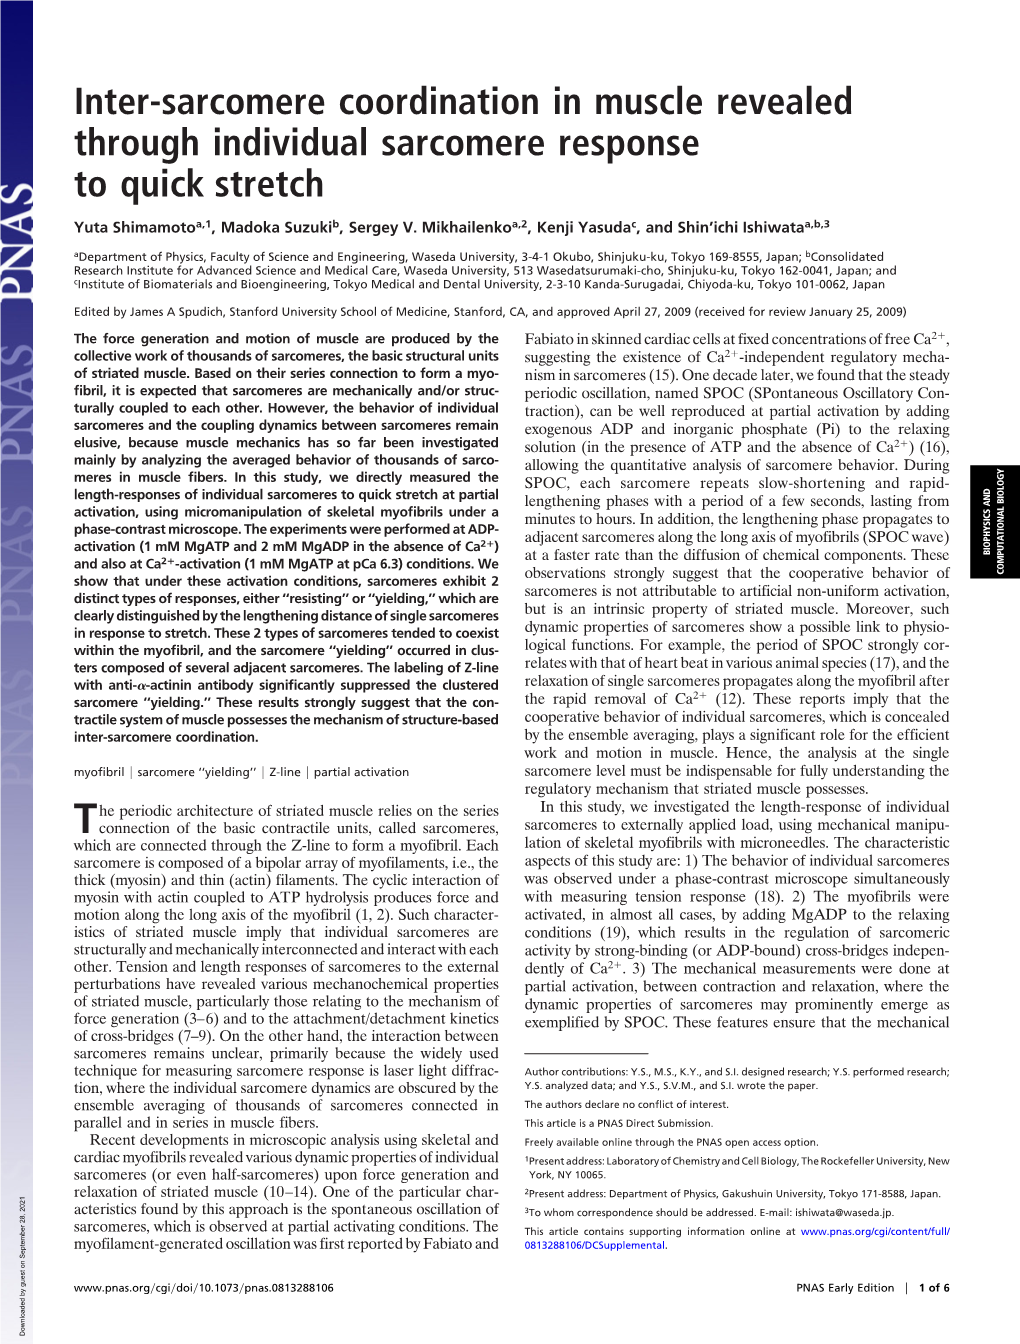 Inter-Sarcomere Coordination in Muscle Revealed Through Individual Sarcomere Response to Quick Stretch